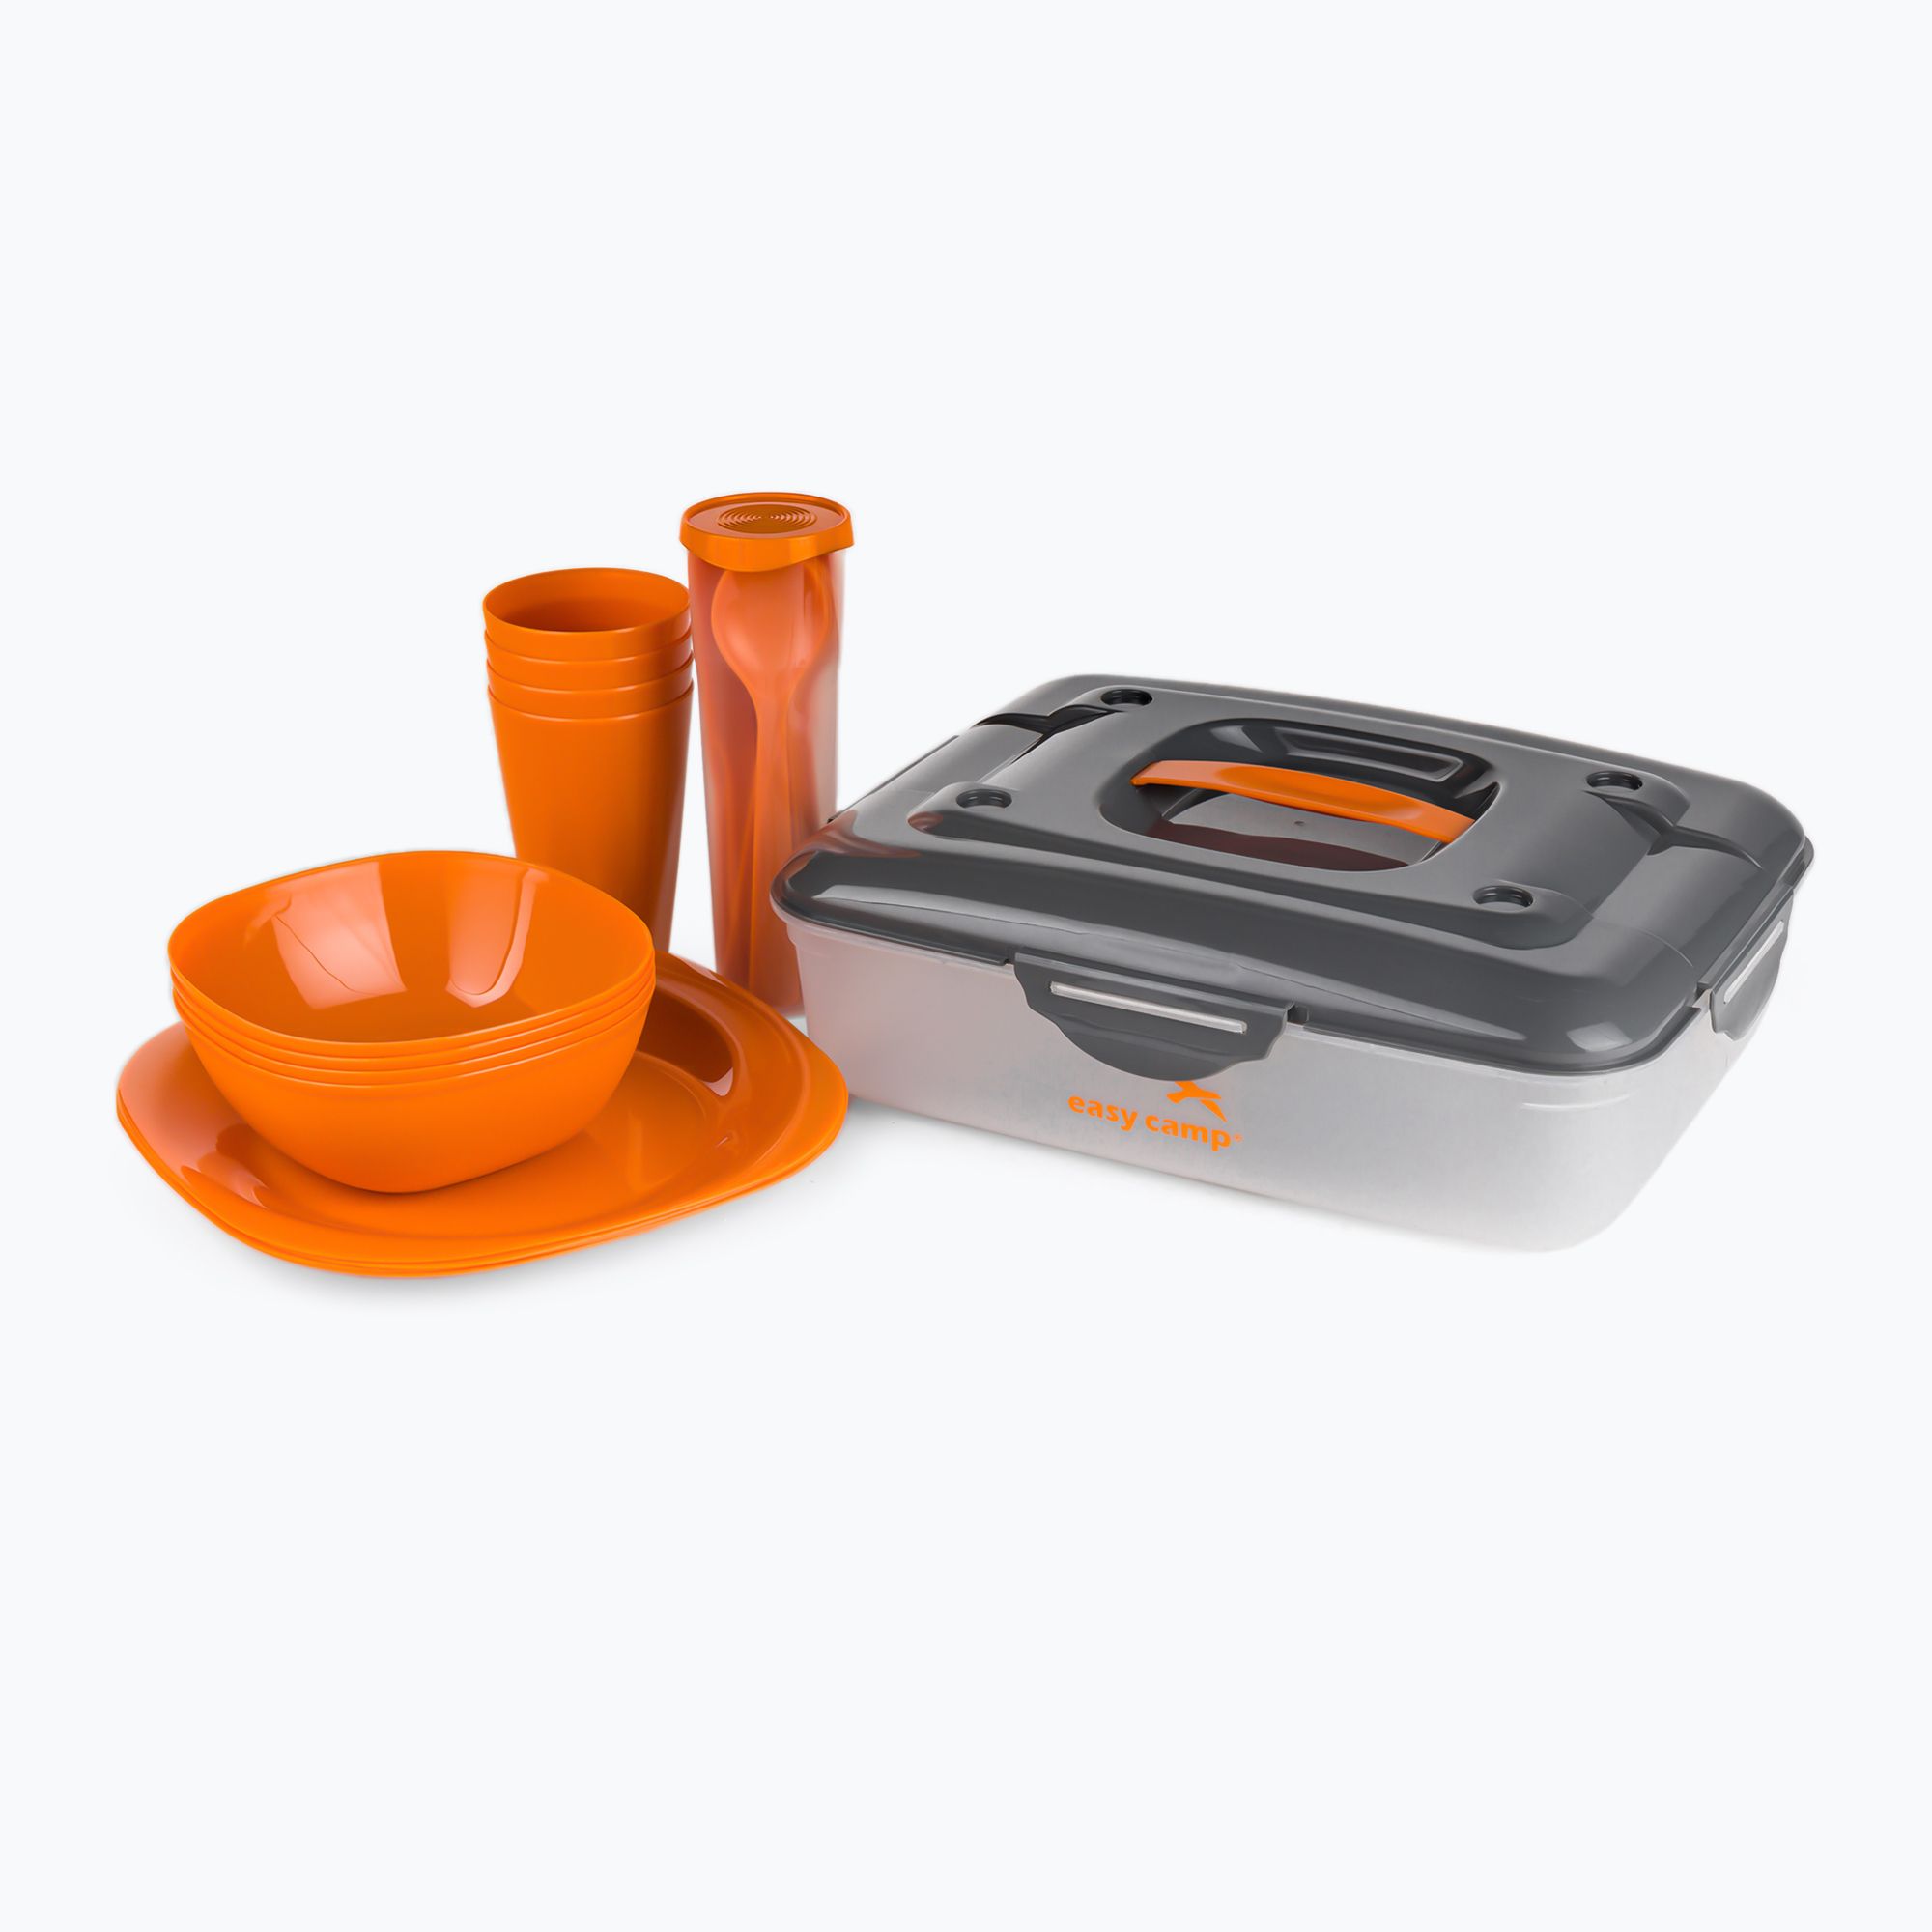 Easy Camp Cerf Picnic hiking cookware Box Persons orange set 4 680162